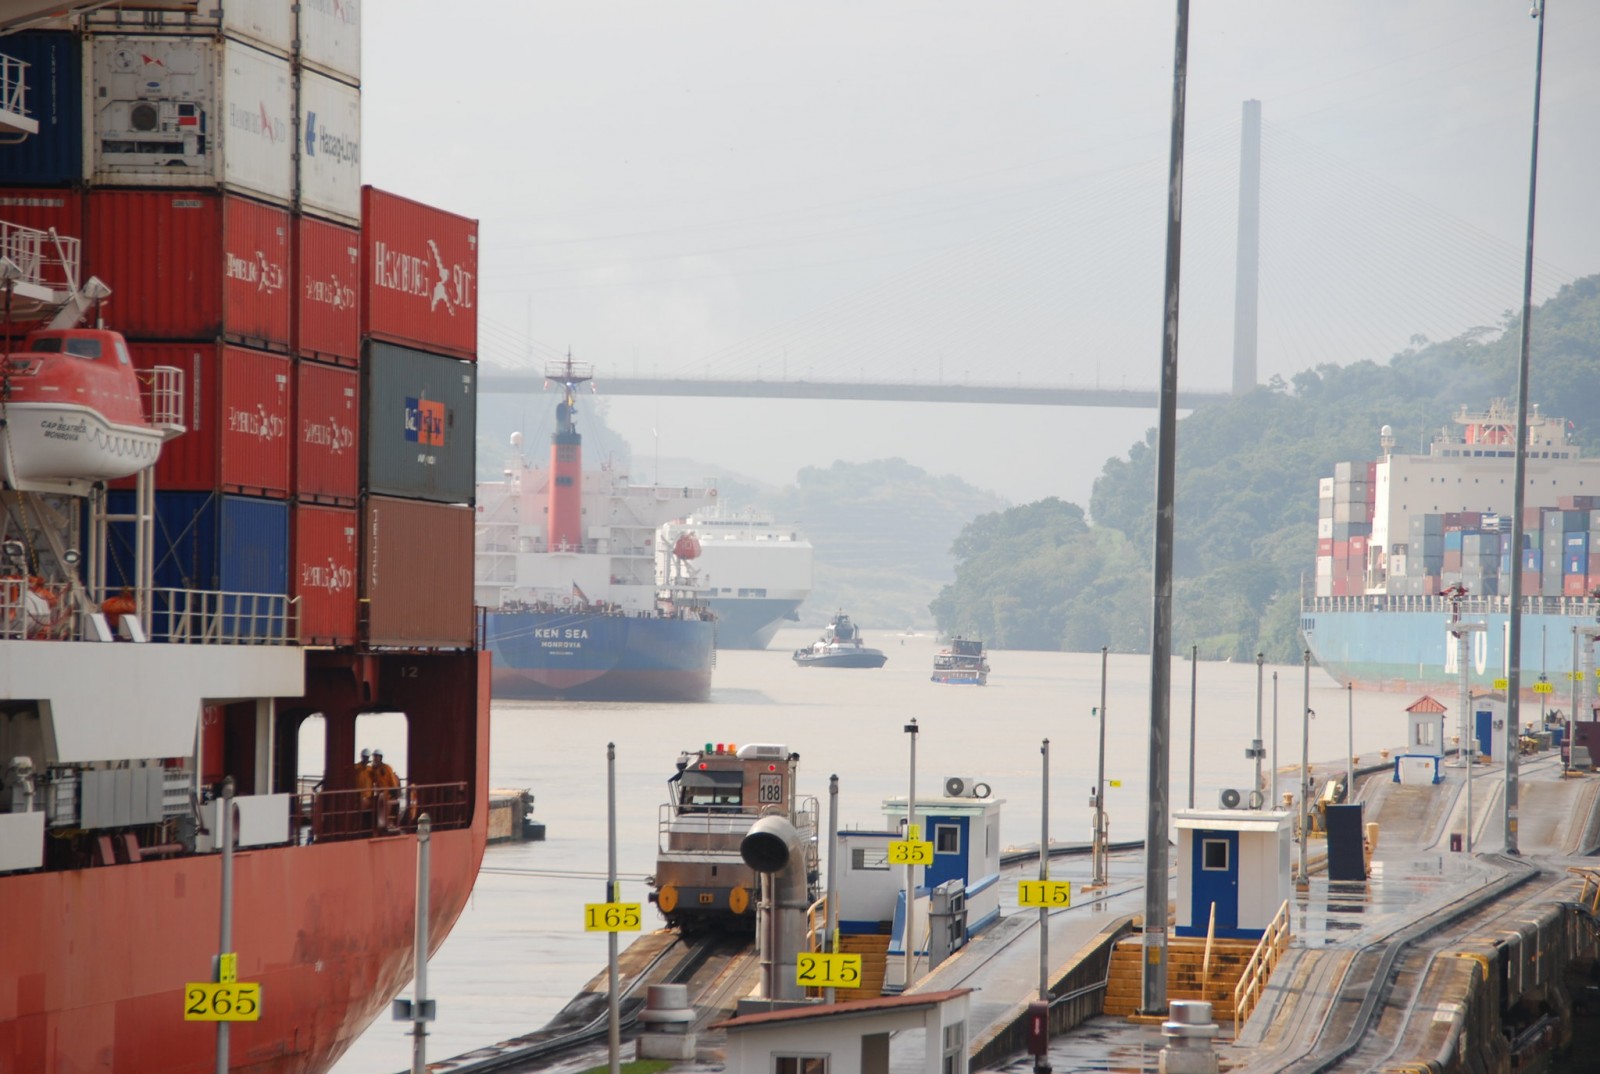 A line-up of ships in the Panama Canal locks